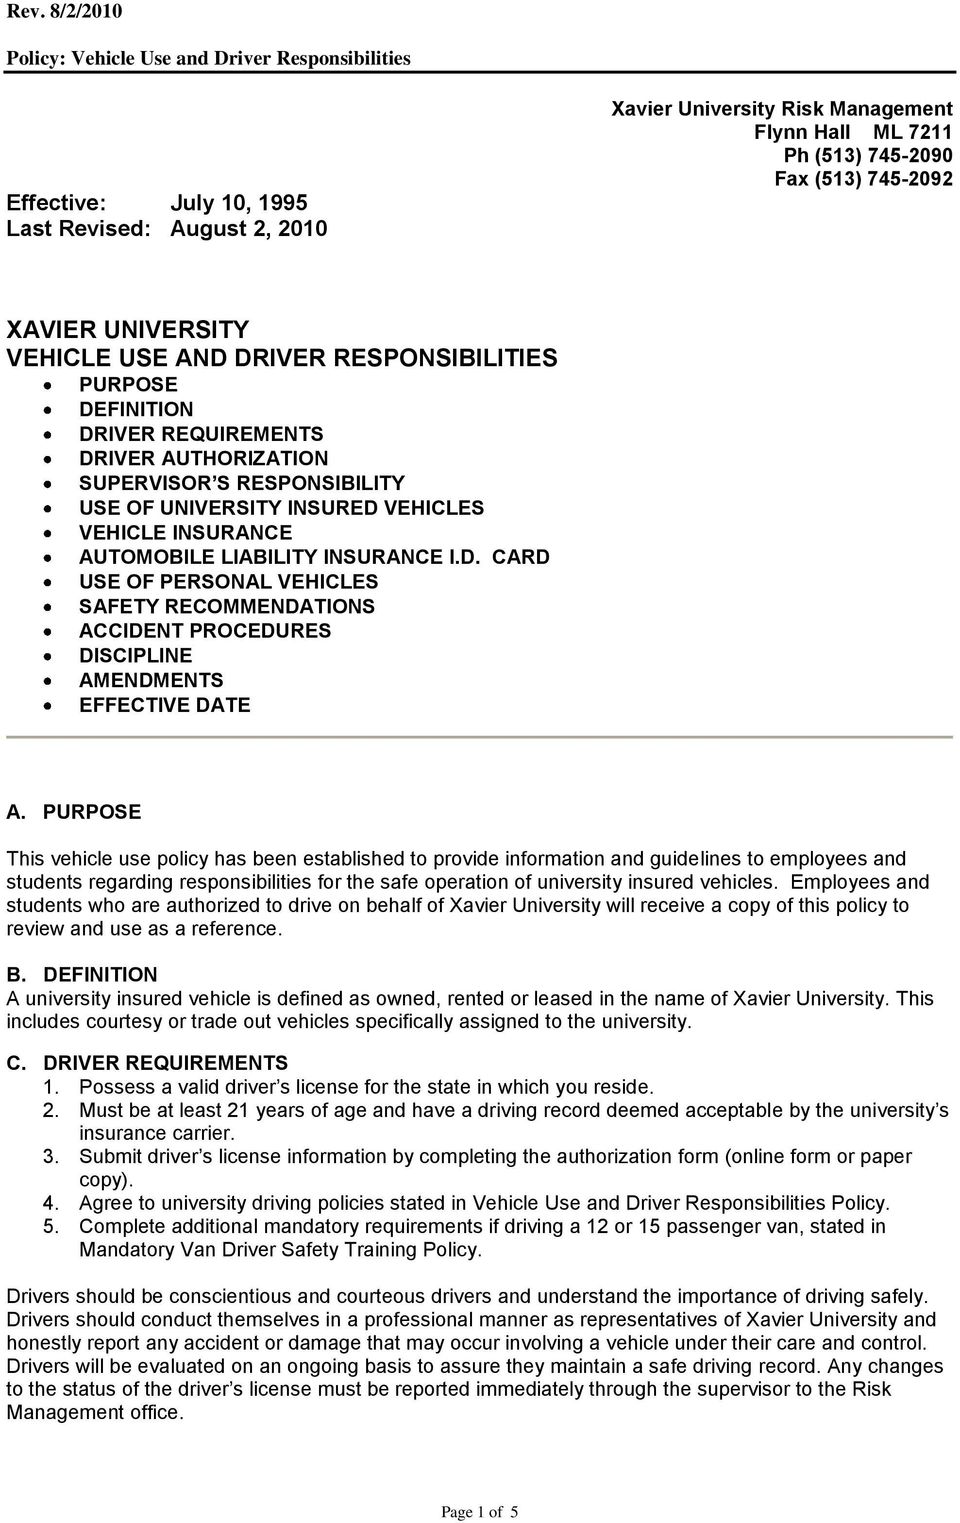 PURPOSE This vehicle use policy has been established to provide information and guidelines to employees and students regarding responsibilities for the safe operation of university insured vehicles.